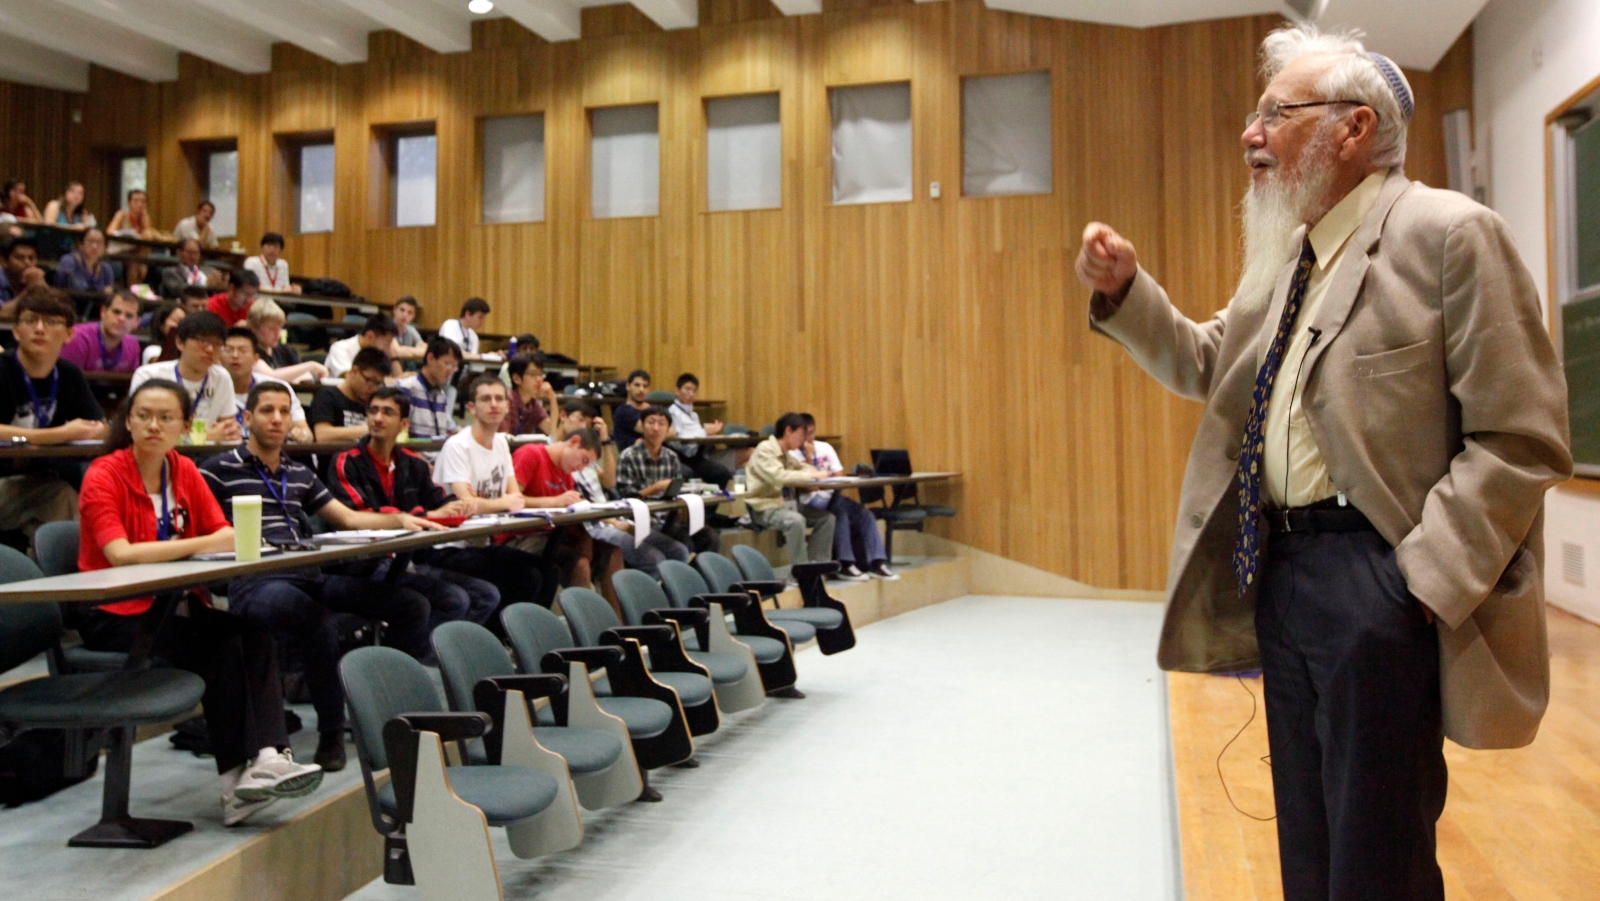 Nobel Laureate Prof. Robert Aumann lectures at a summer program for international science students at the Hebrew University in Jerusalem. Photo by Miriam Alster/FLASH90